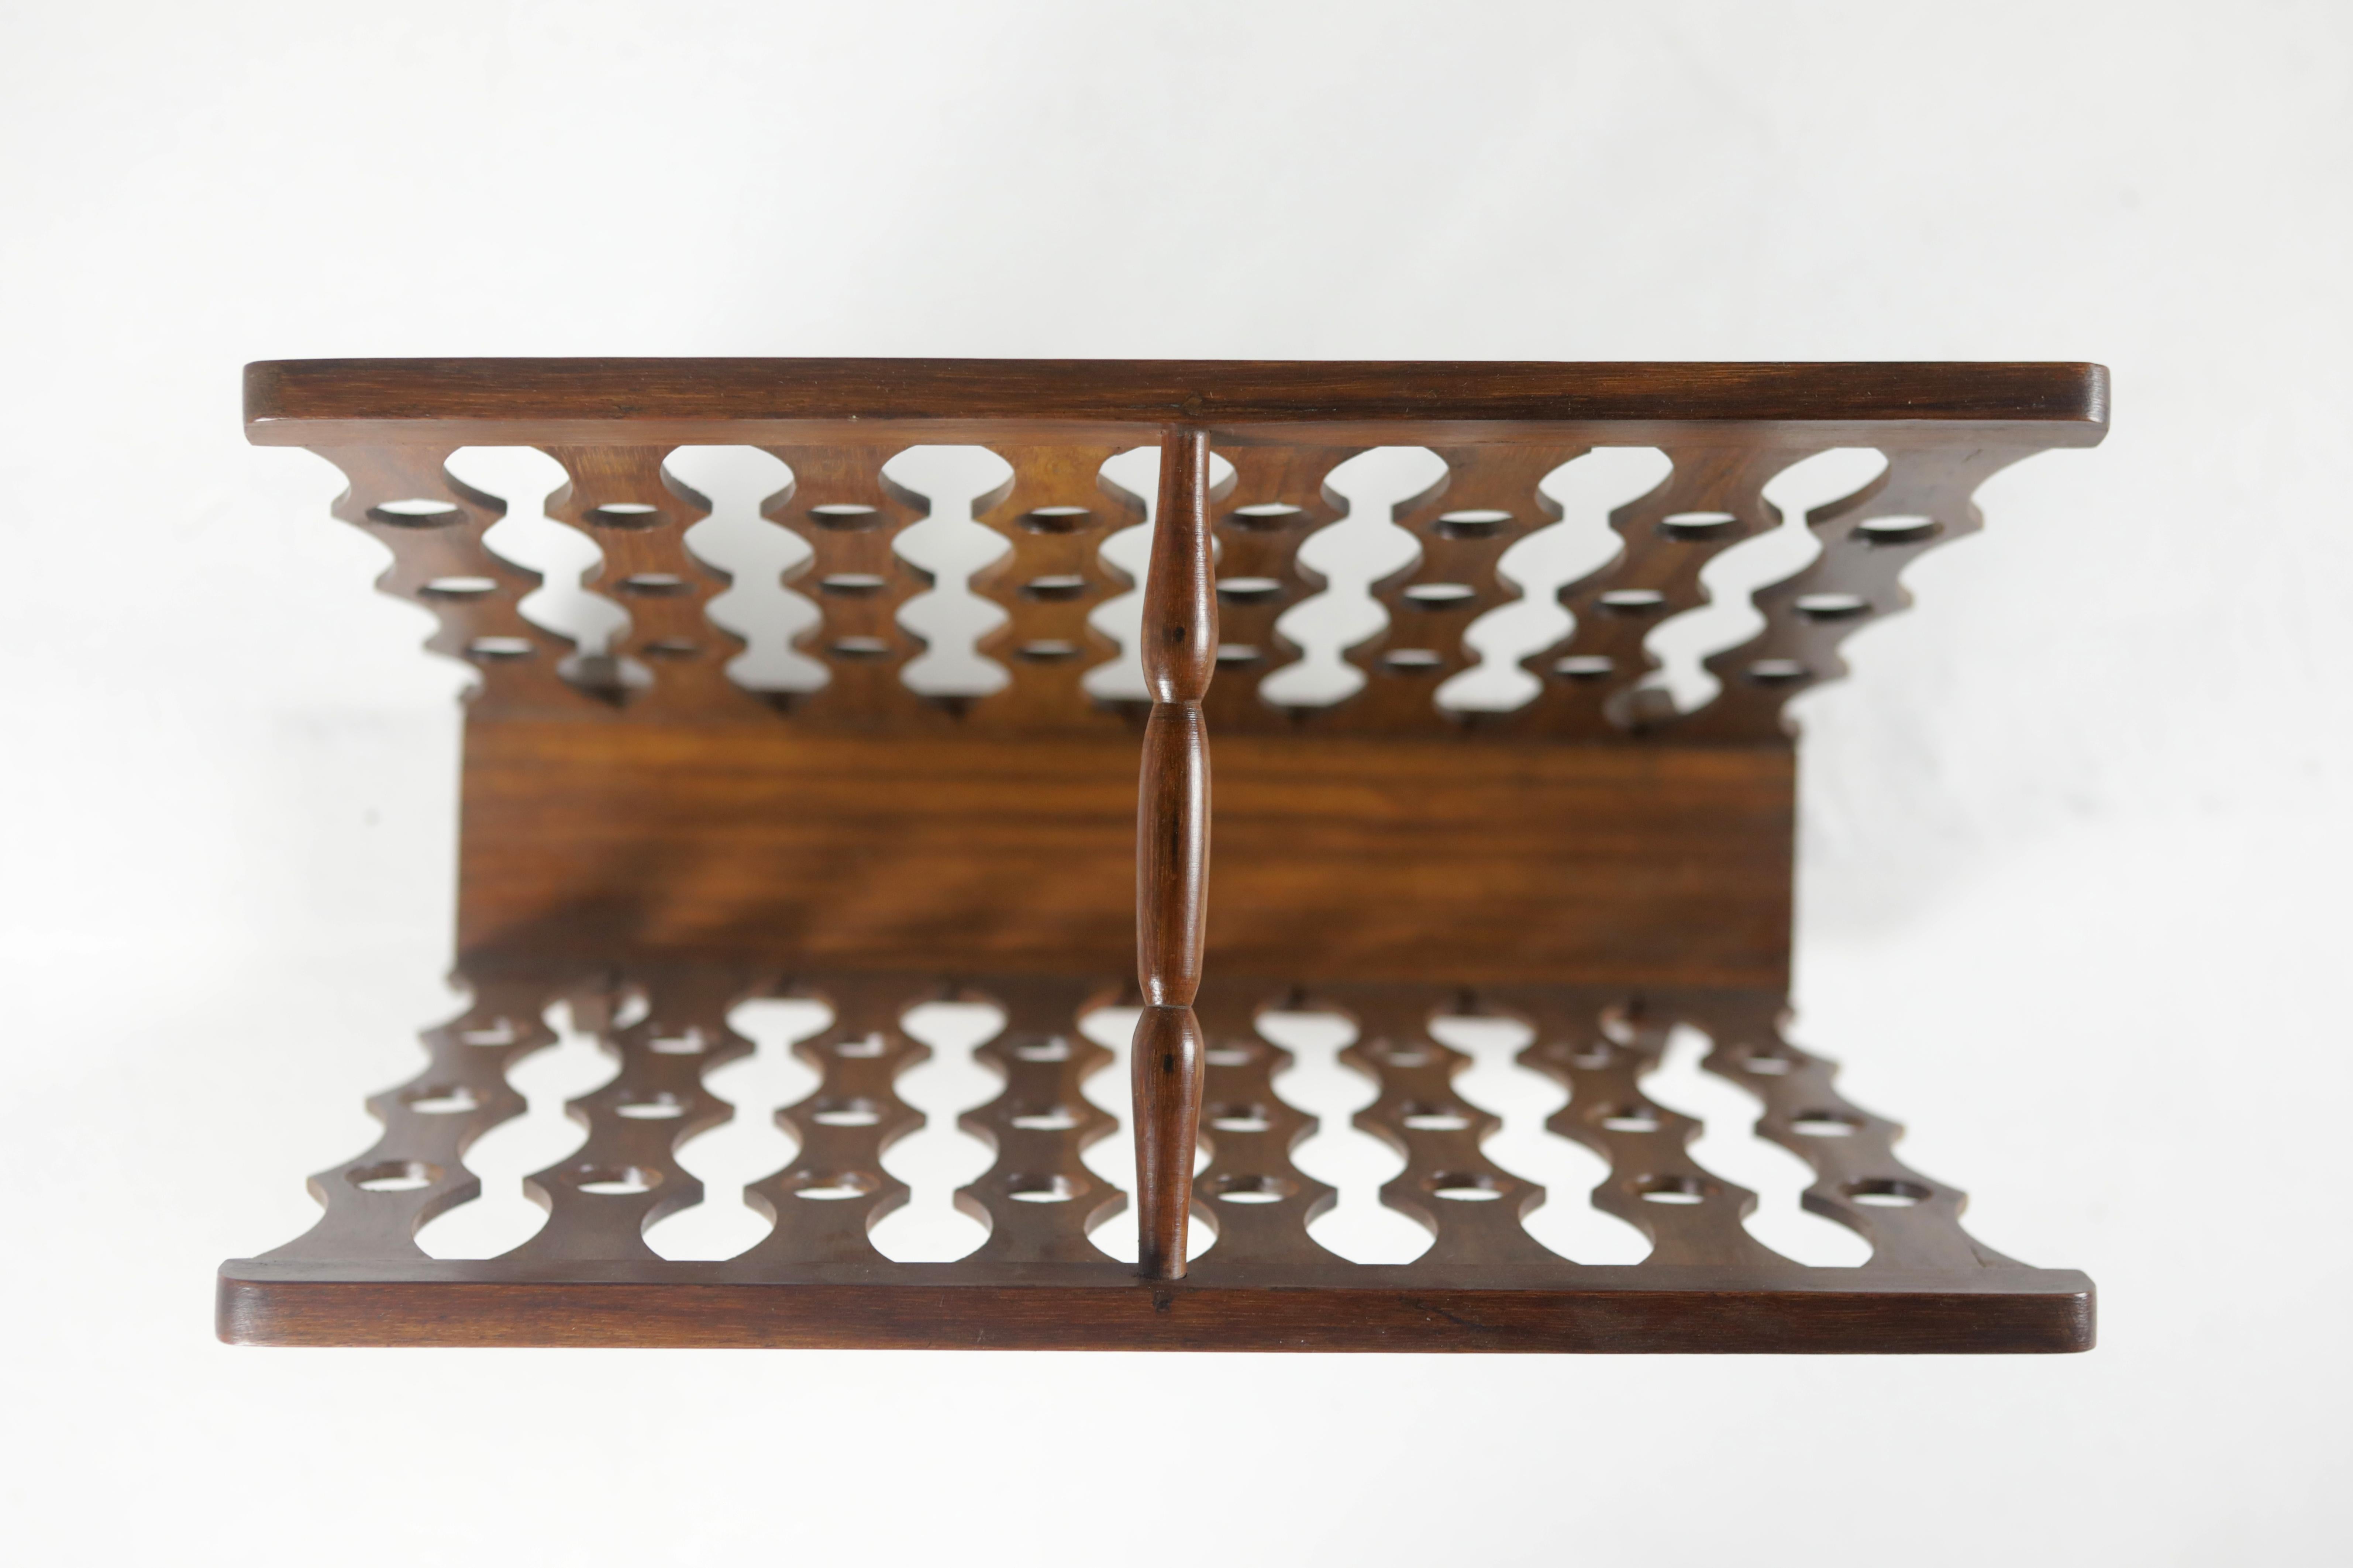 Mid-Century Modern wood magazine rack by Unattributed Brazilian Designer.

Made of solid wood and finished with varnish, this piece is part of a set of magazine racks and other pieces by unknown Brazilian artists from the 50's.